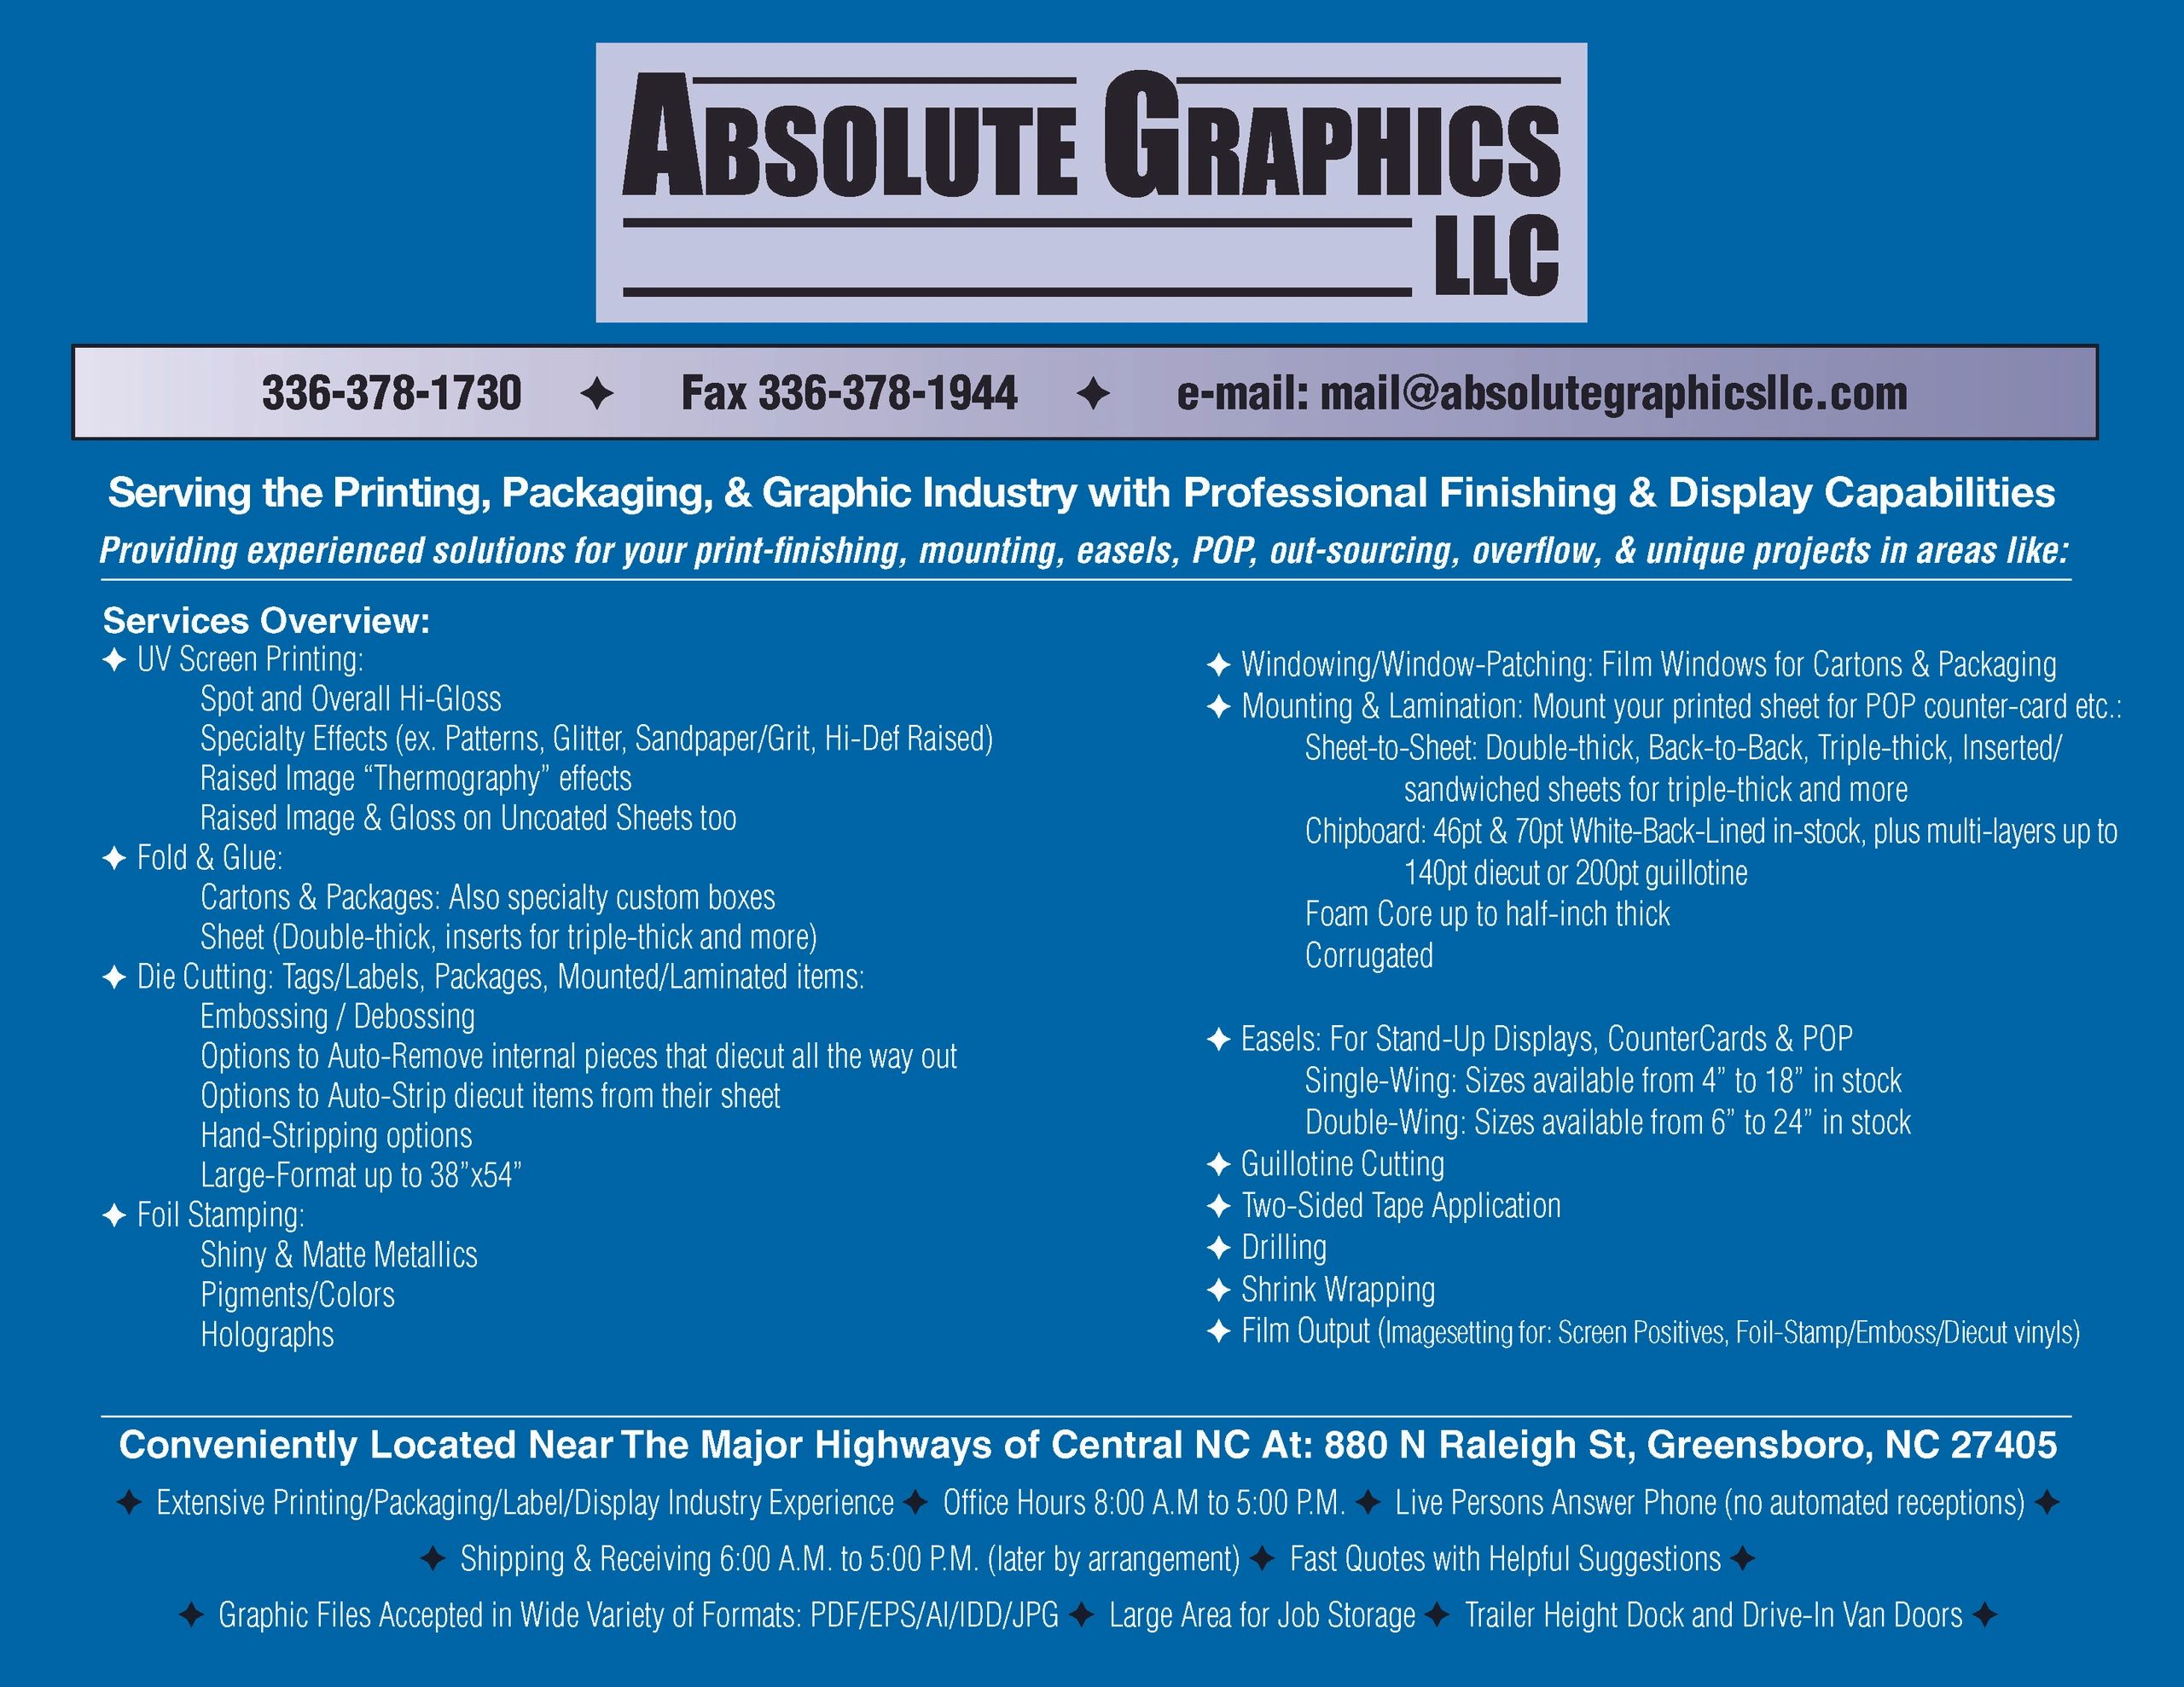 Serving the Printing, Packaging, & Graphic Industry with...
Professional Print-Finishing & Display 